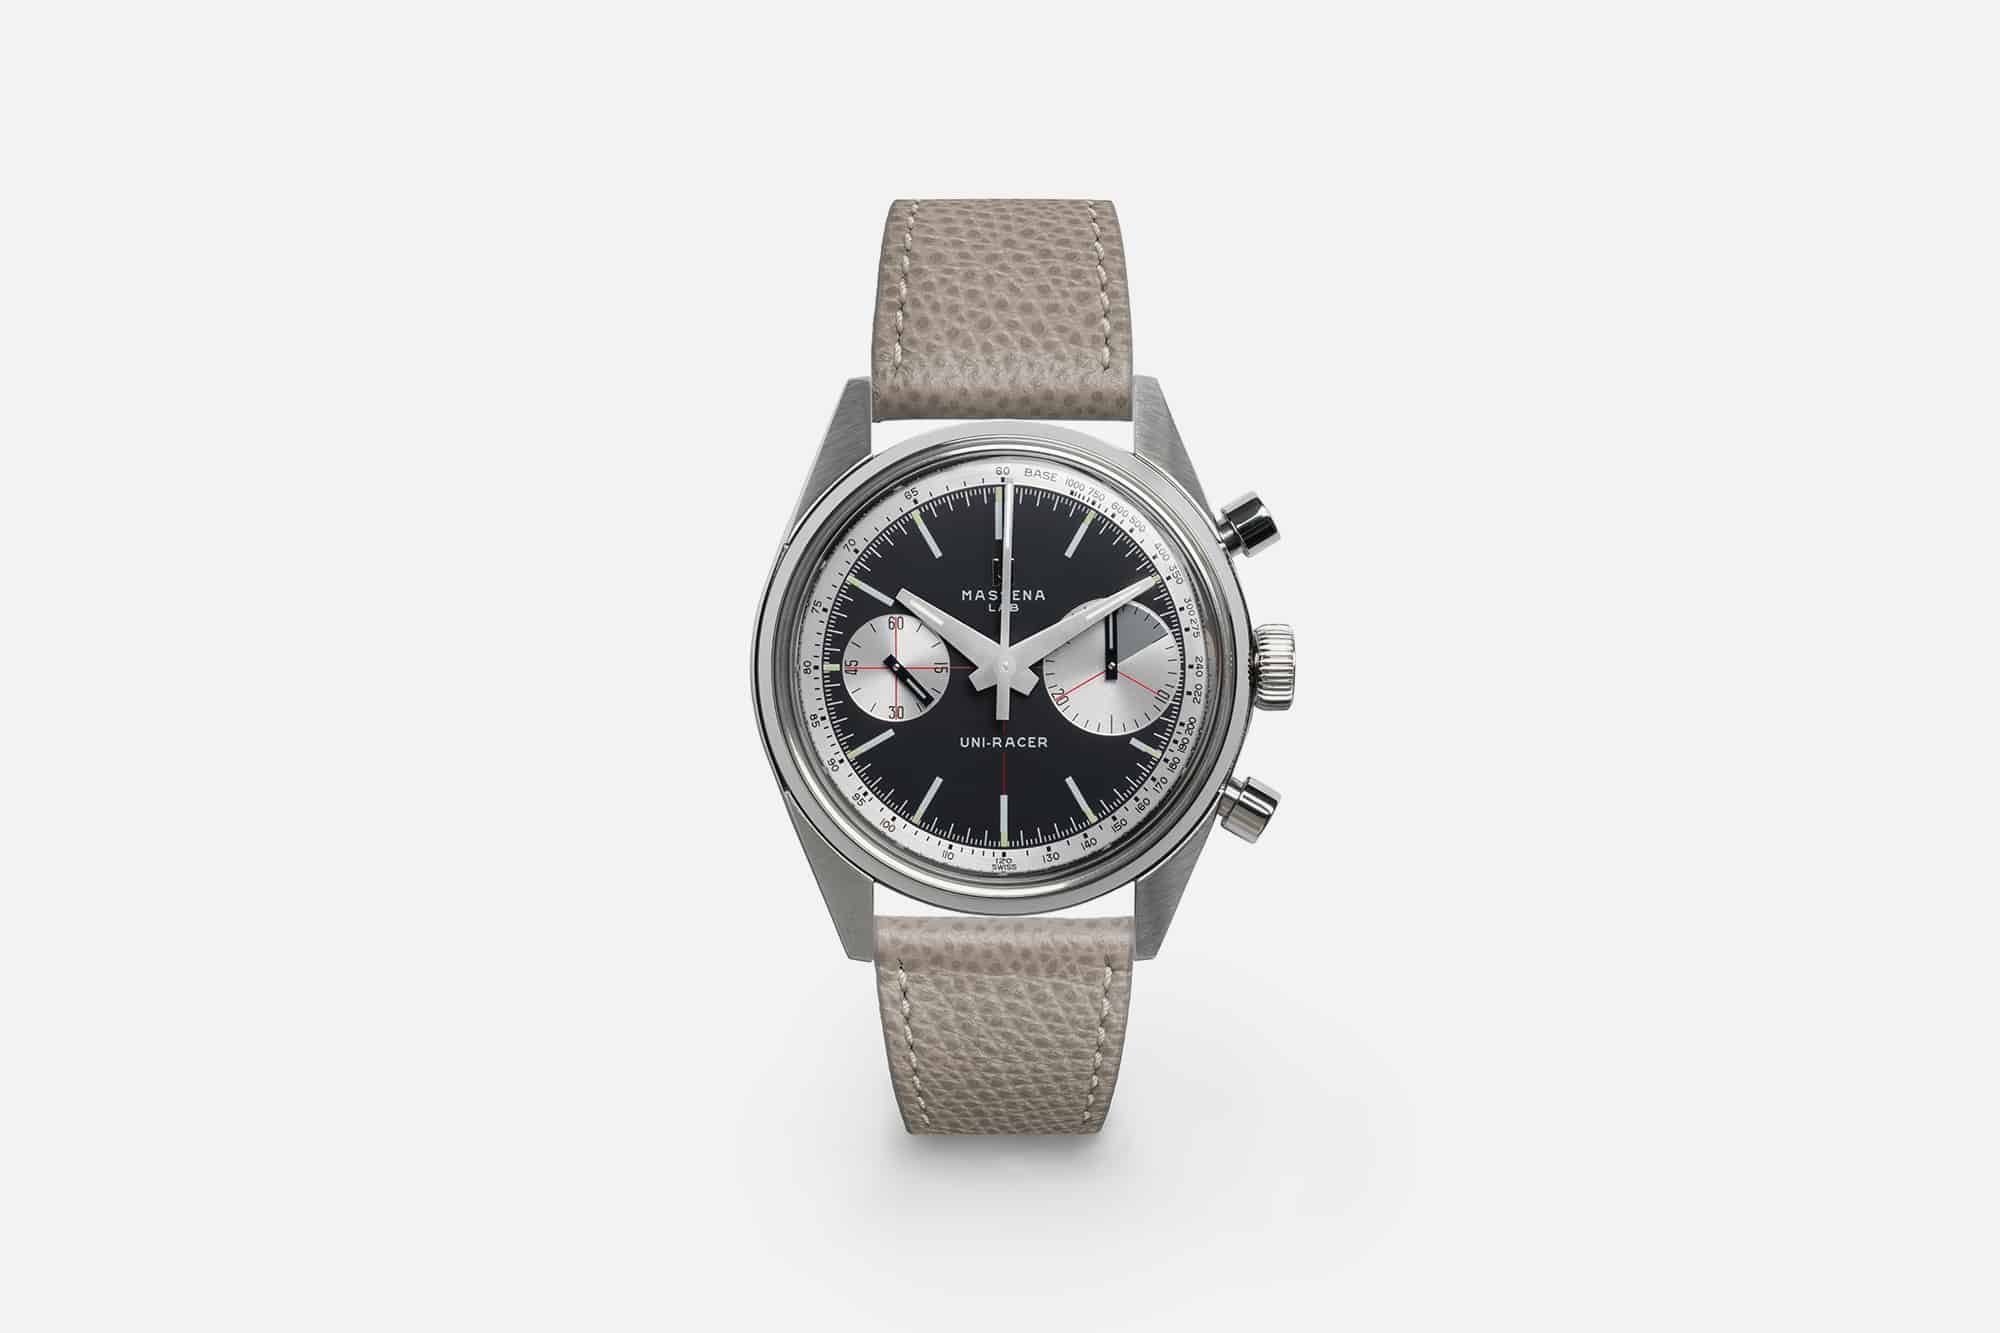 Massena LAB Introduces their First Solo Venture, Inspired by a Classic 60s Chrono: the Uni-Racer